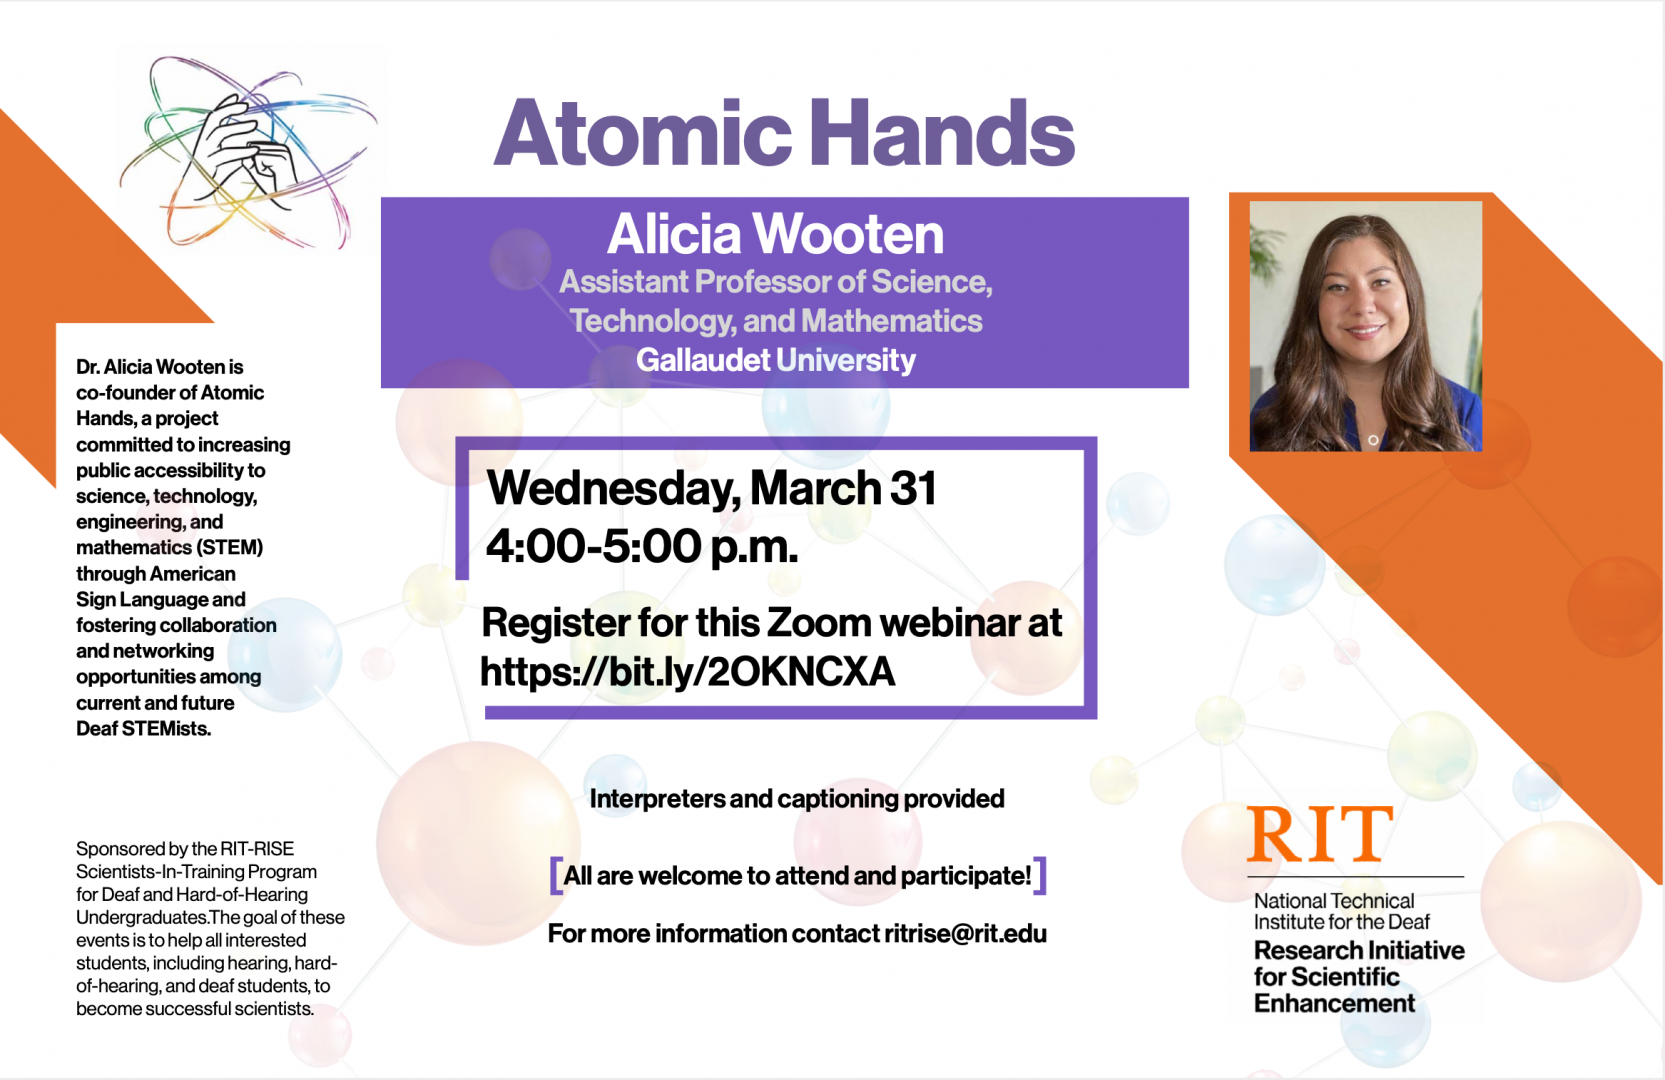 “Atomic Hands” presented by Dr. Alicia Wooten. Interpreters and captioning provided. All are welcome to attend and participate! Wednesday, March 31 at 4-5pm. Register for this Zoom webinar at https://rit.zoom.us/webinar/register/WN_vAHrNujDRYGKGPcmmfUrmw  For more information contact ritrise@rit.edu